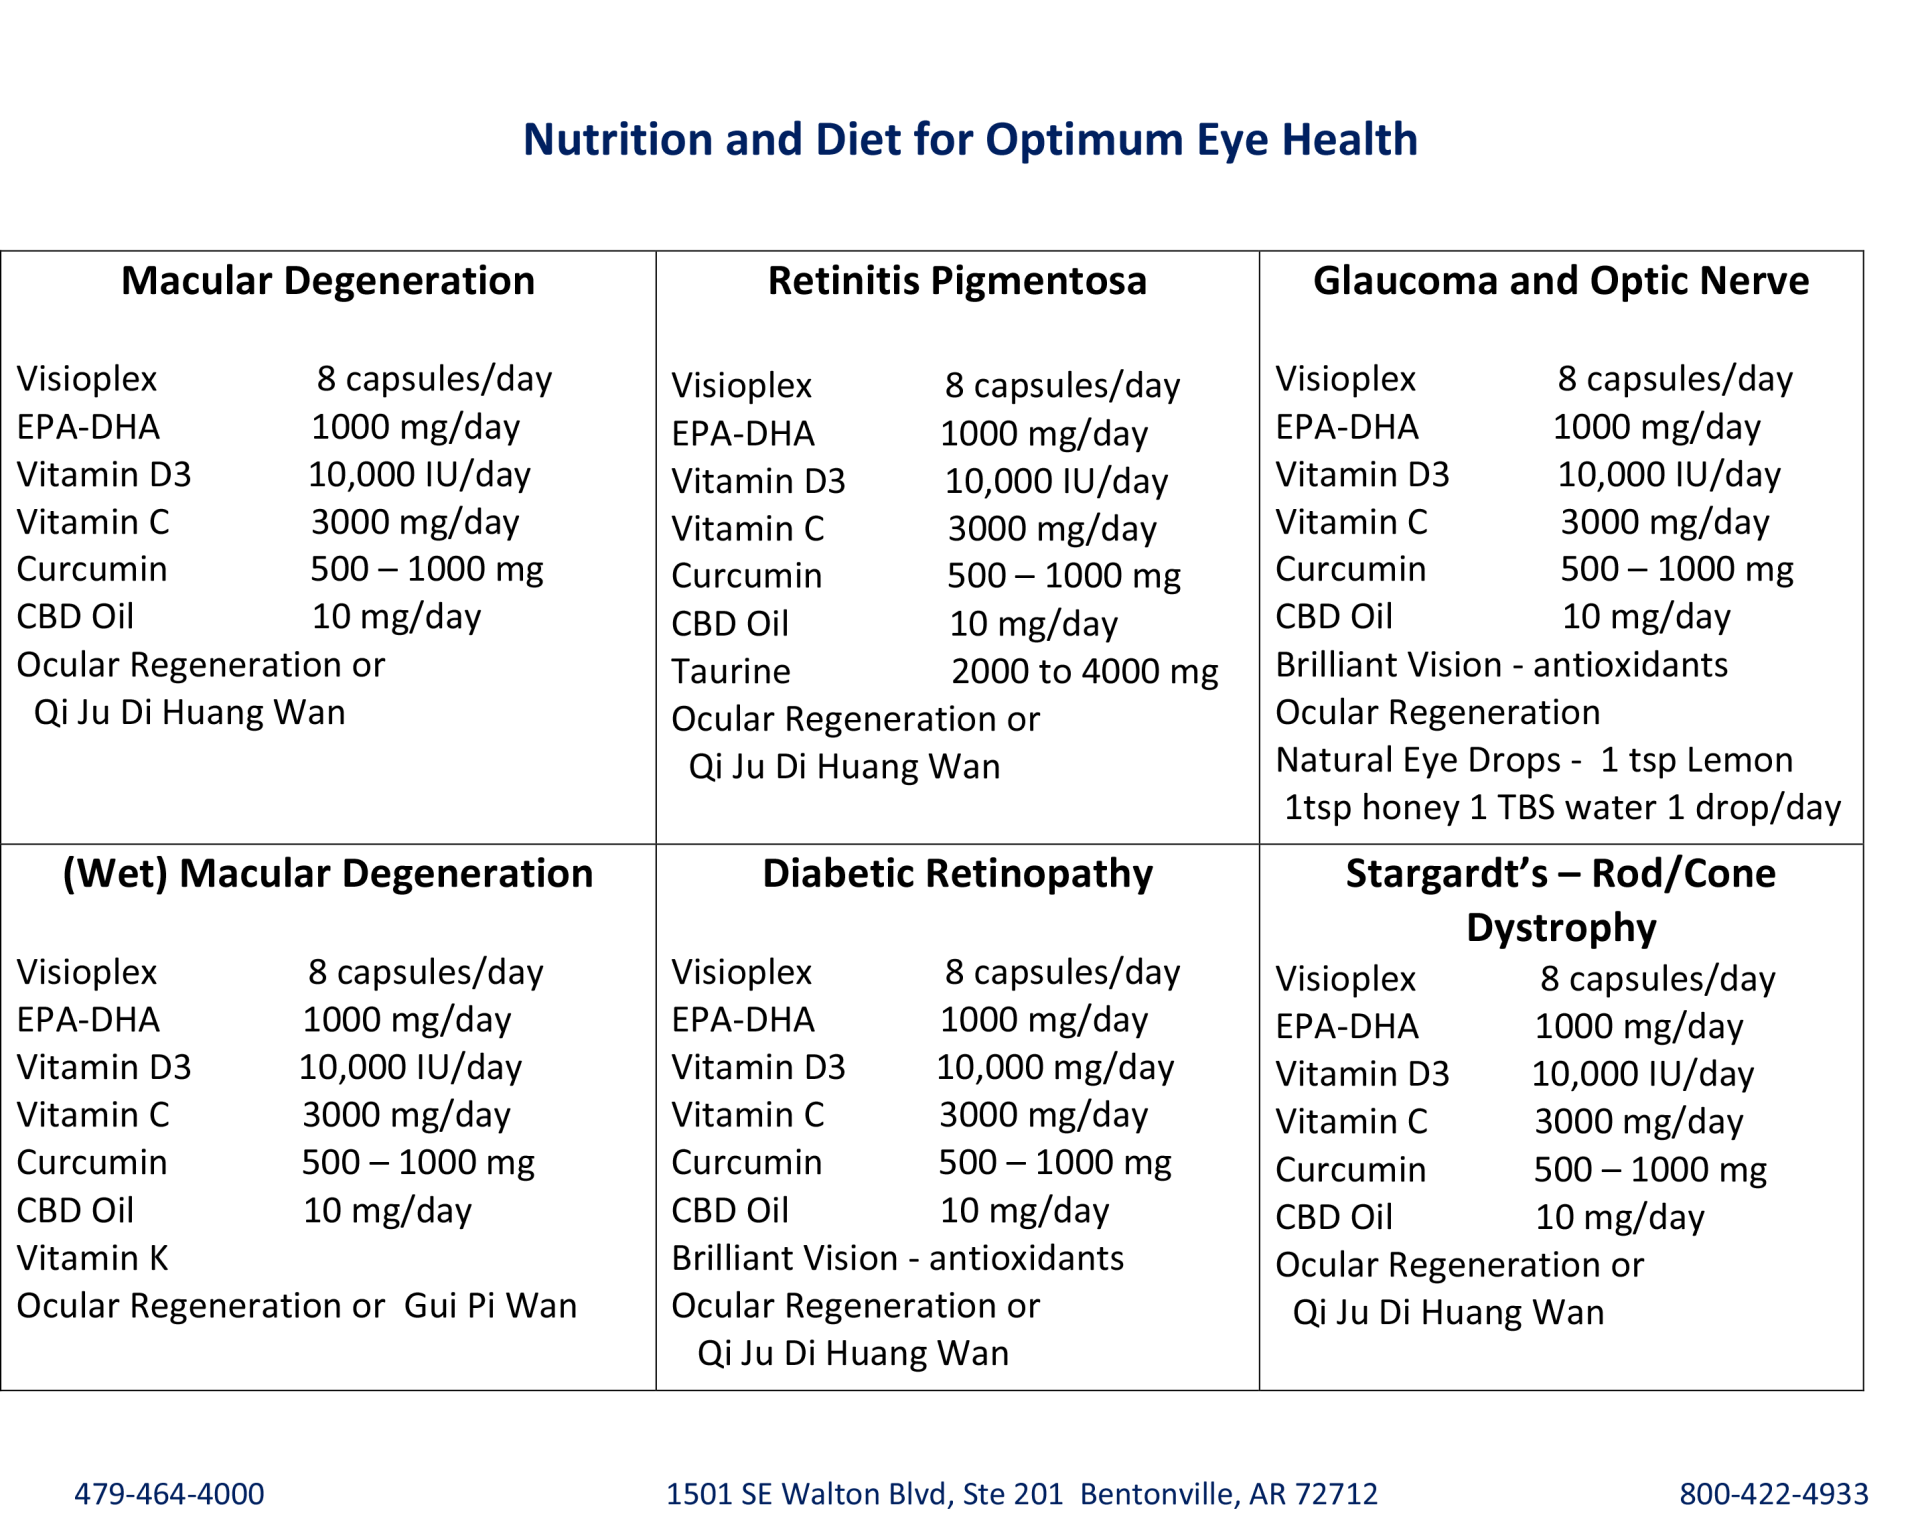 Nutrition and Diet for Optimum Eye Health